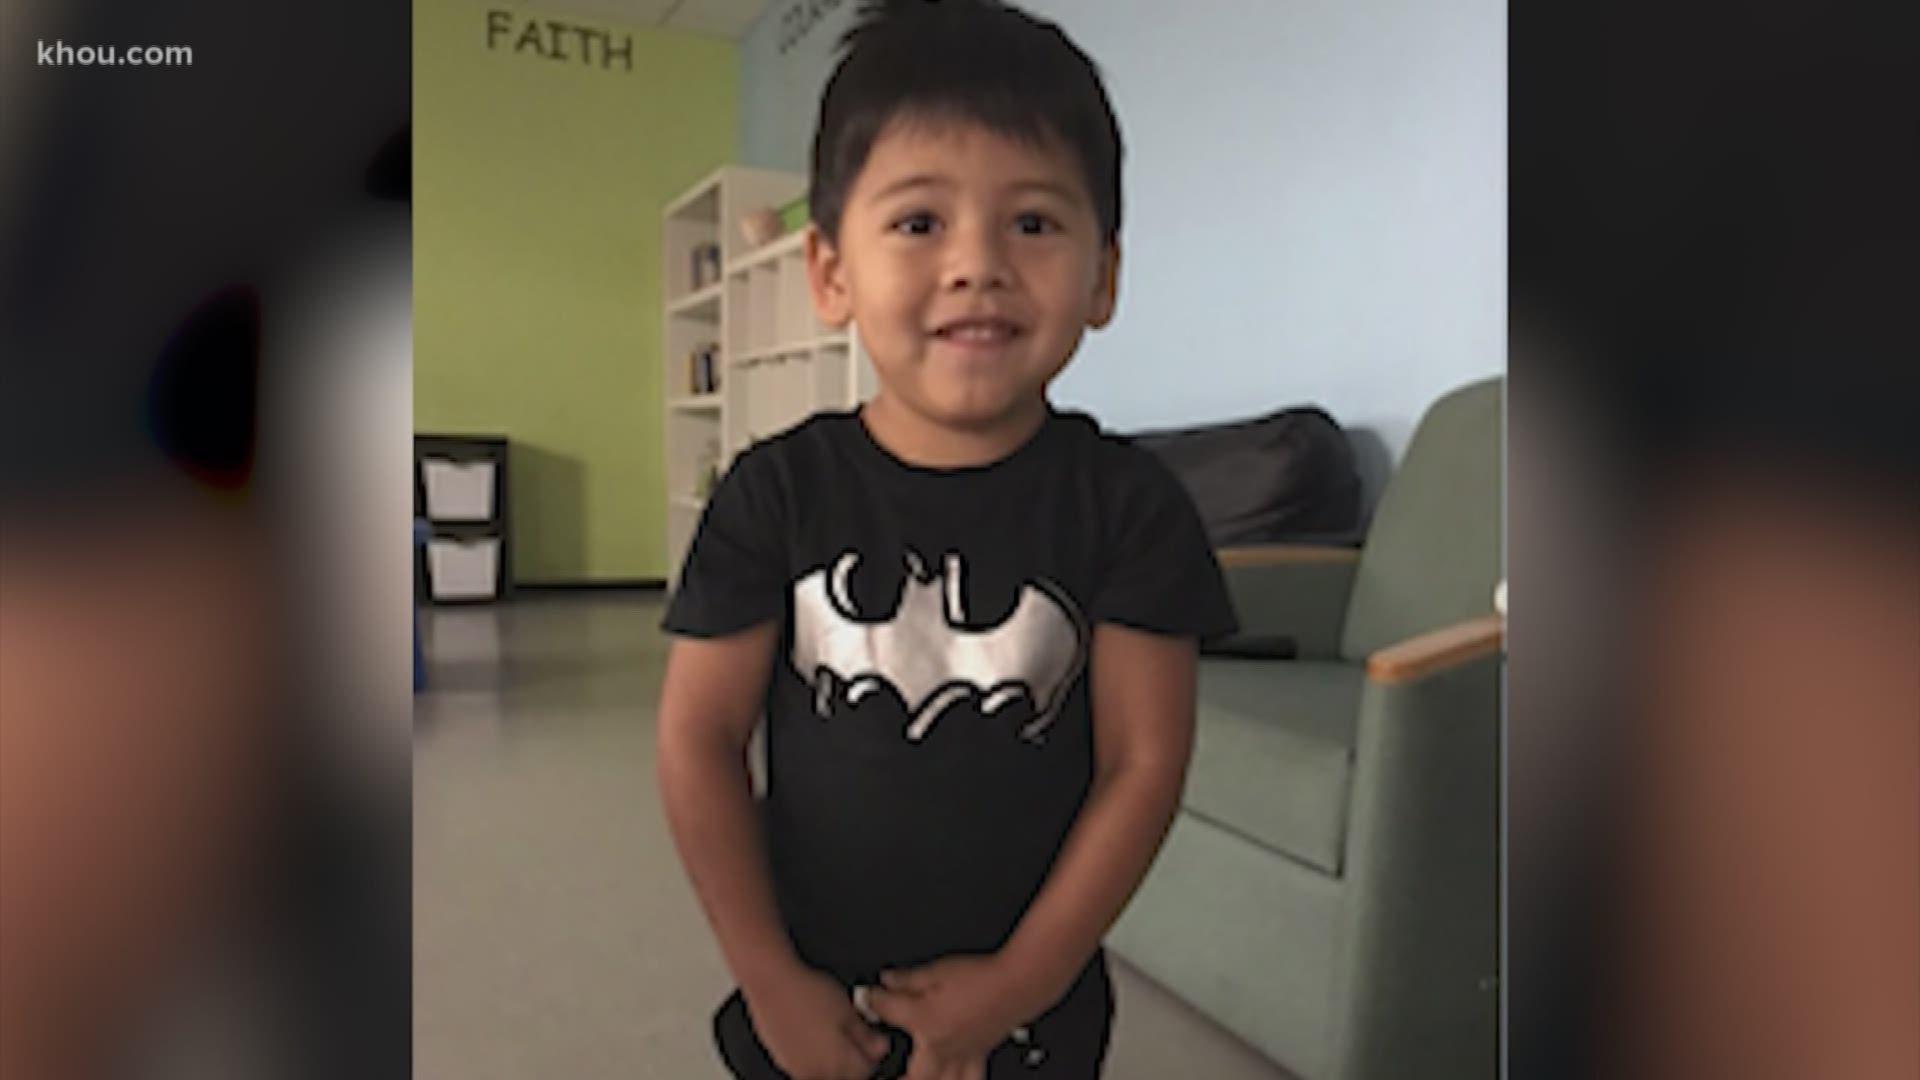 The Harris County Sheriff’s Office said they located the father of the 3-year-old boy found wandering alone a northwest Harris County street early Sunday morning.